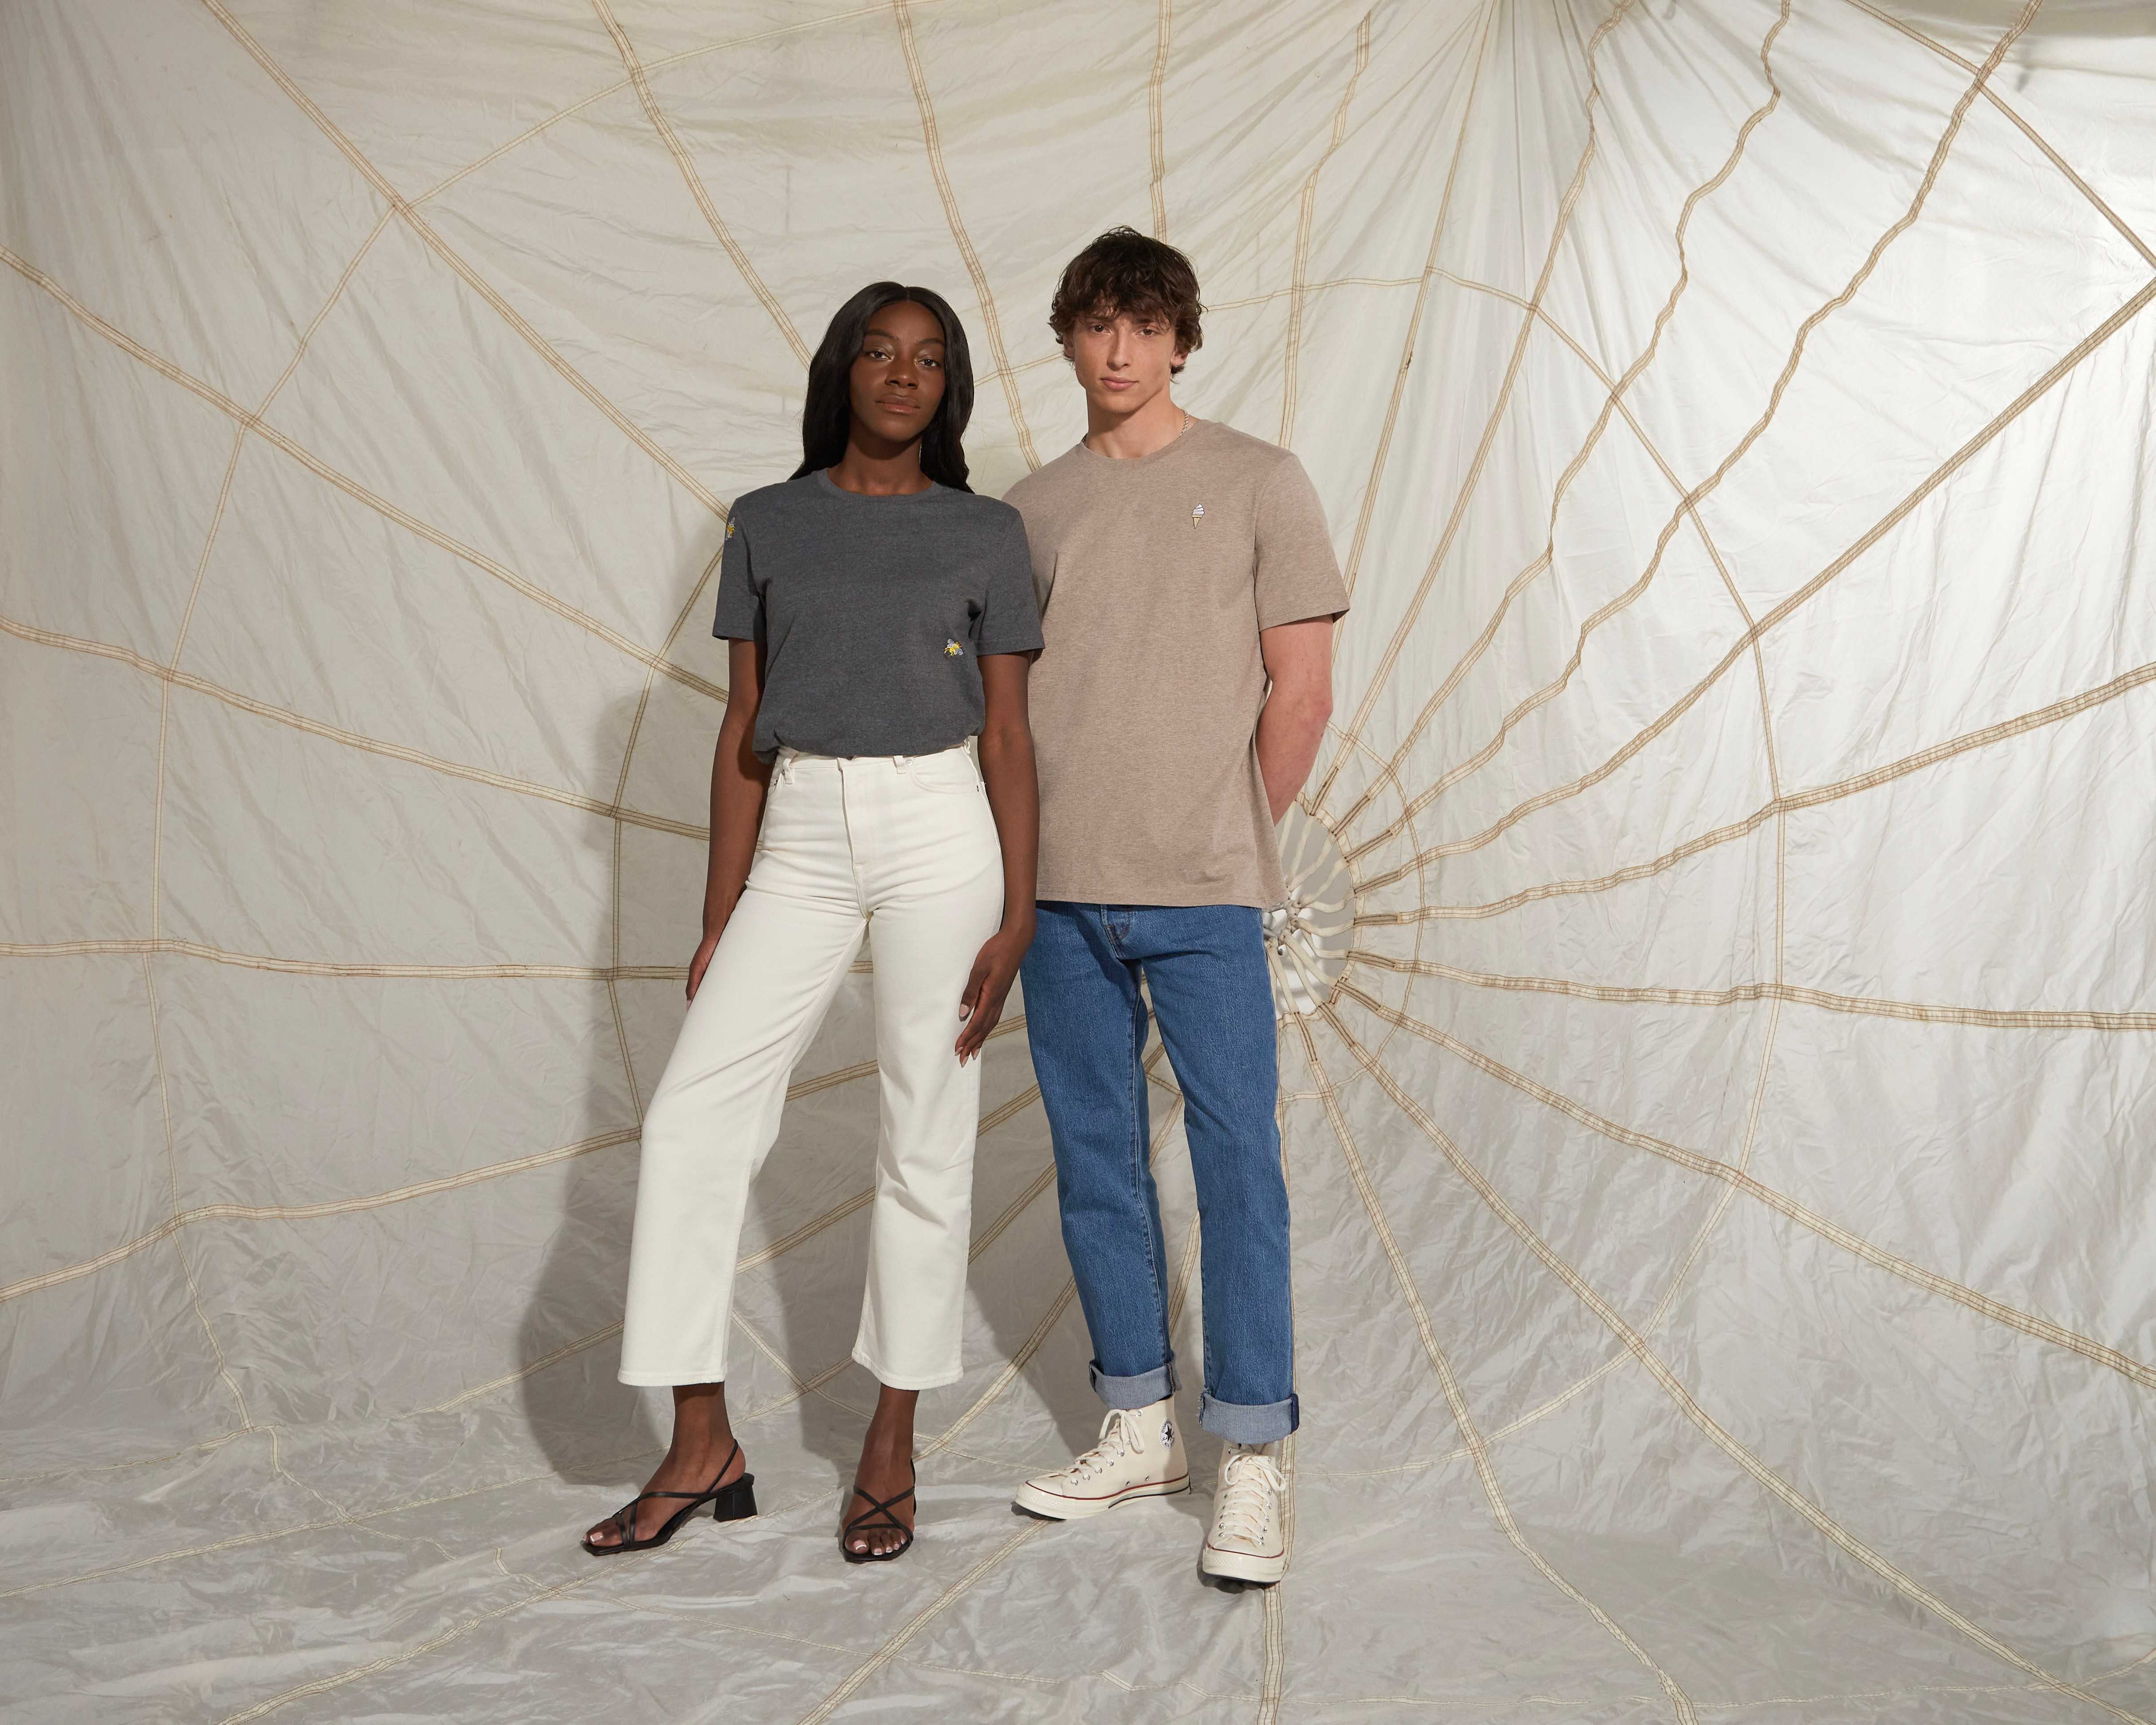 Couple standing infront of a parashute wearing embroideared tshirts and levis jeans and converse shoes